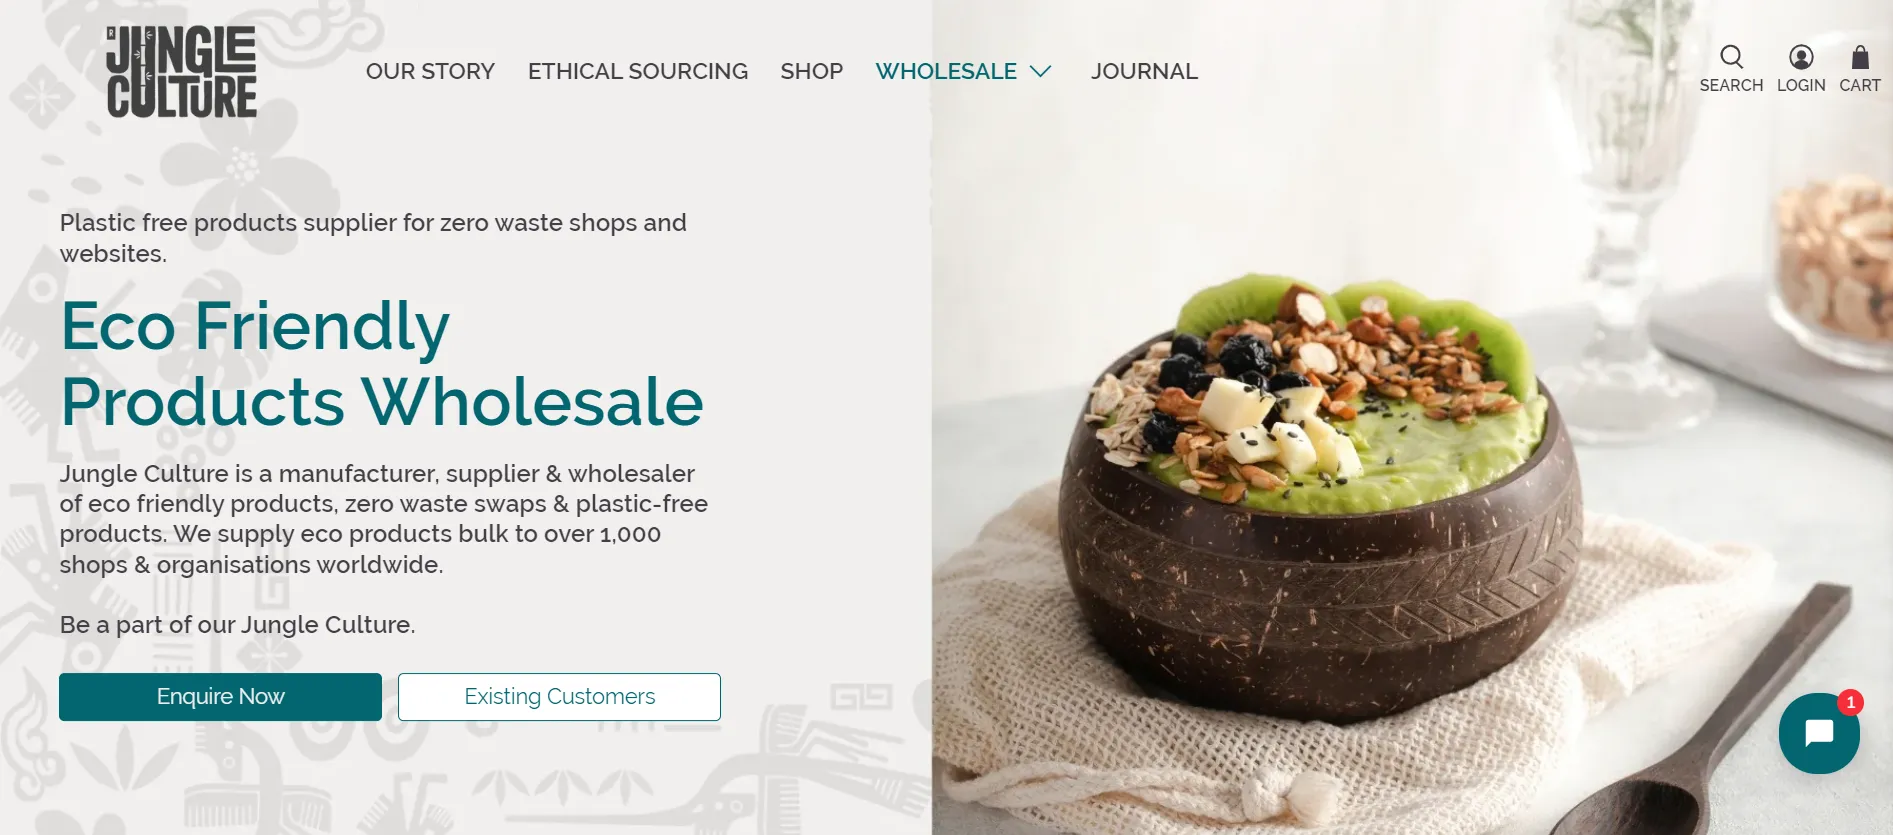 15 Hot Eco-Friendly Product Ideas to Sell Online